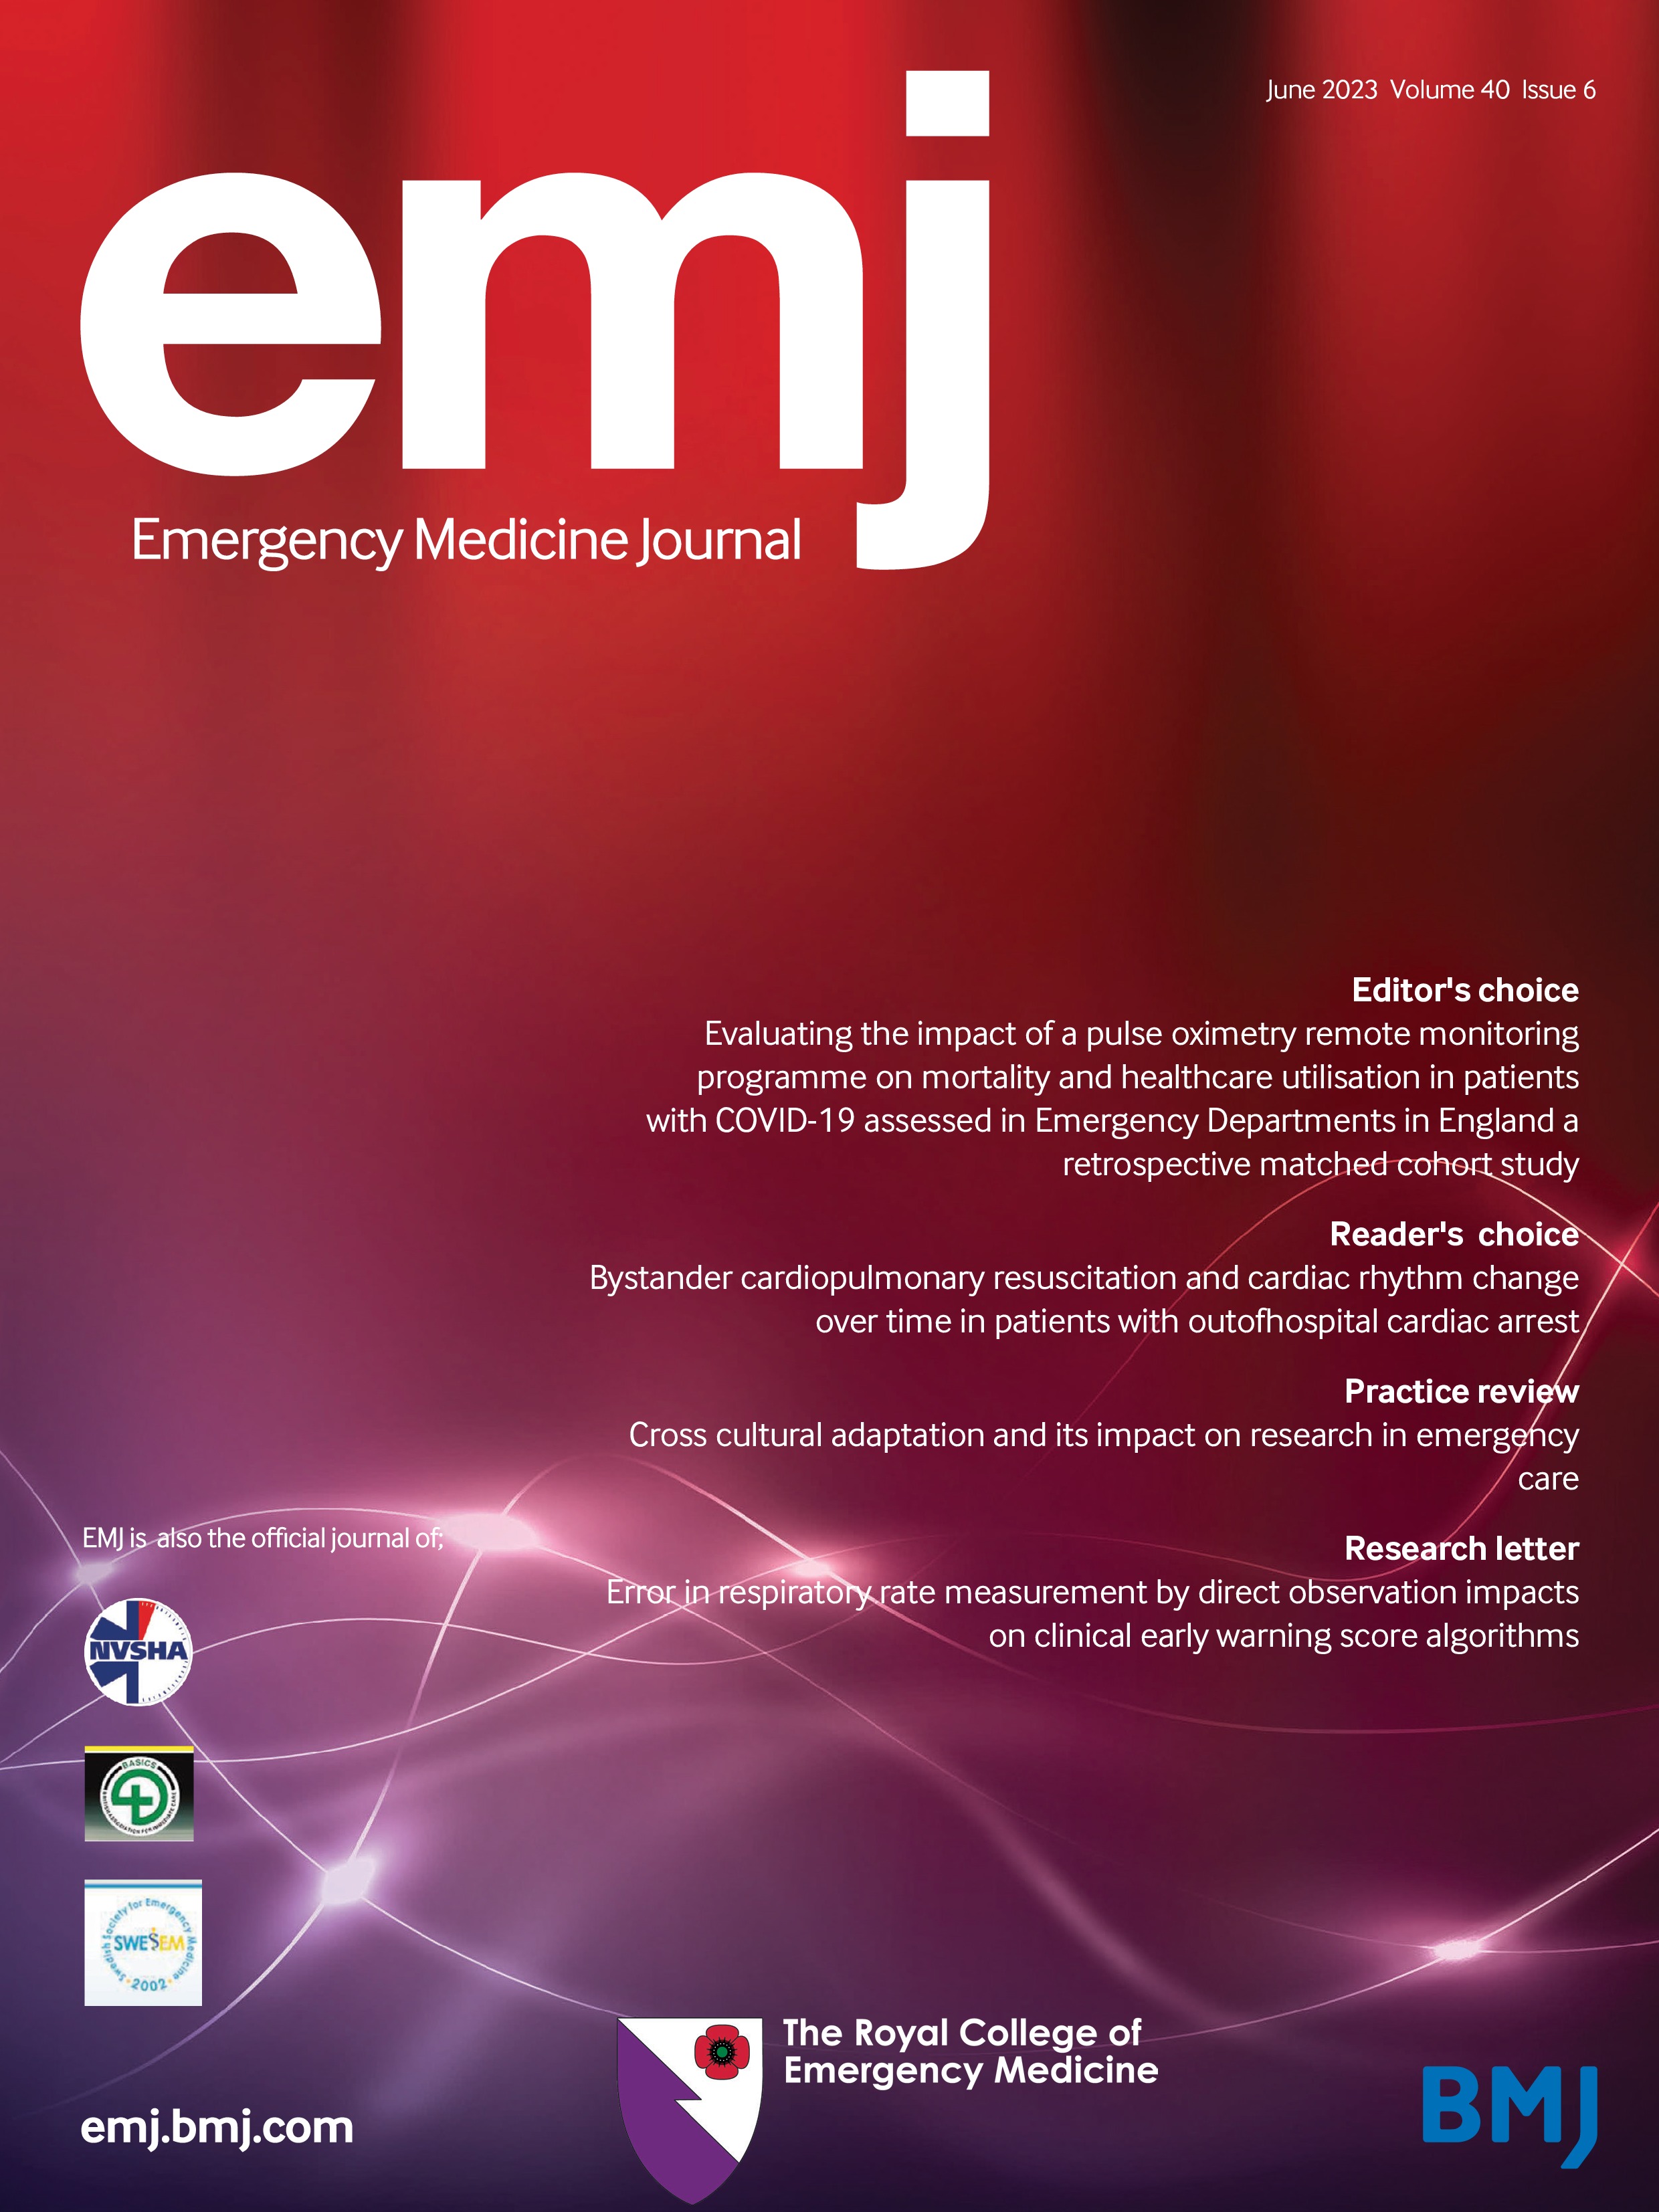 Evaluating the impact of a pulse oximetry remote monitoring programme on mortality and healthcare utilisation in patients with COVID-19 assessed in emergency departments in England: a retrospective matched cohort study